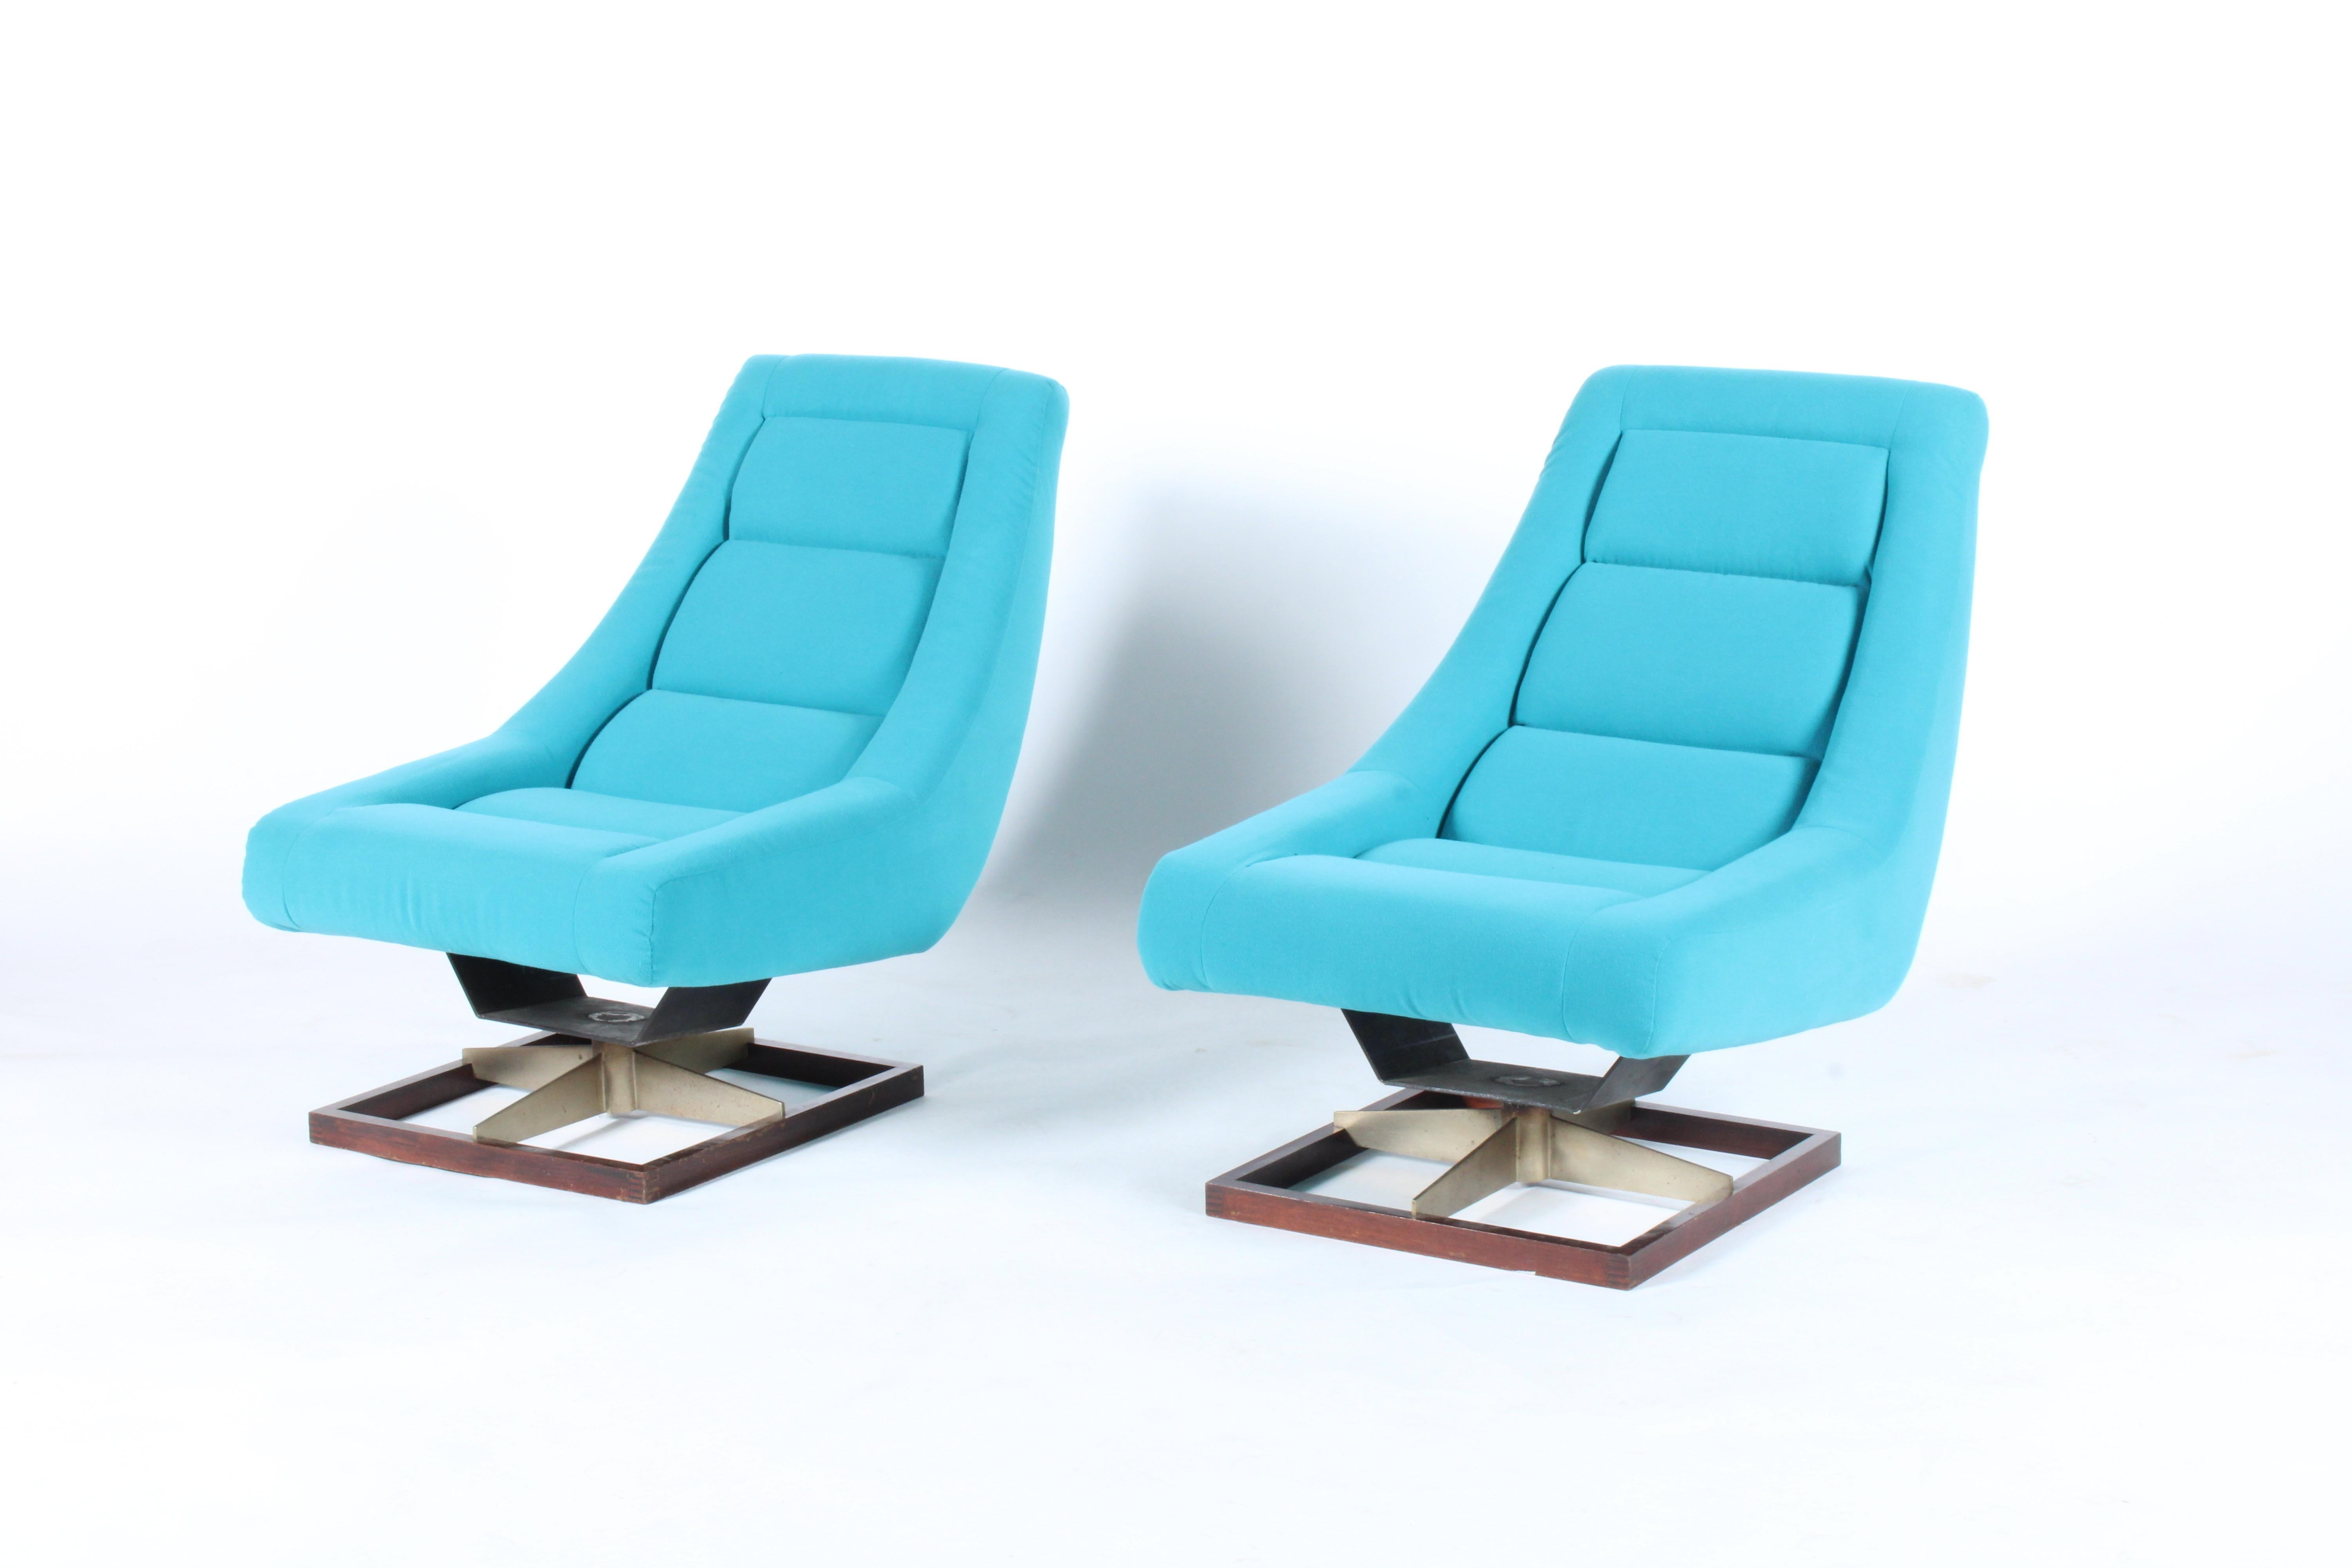 Striking pair of vintage Italian lounge chairs which we have had newly upholstered in a vivid blue fabric. Sourced from a private residence in beautiful Verona, Italy this gorgeous pair are the perfect set to make a real impact in any private or